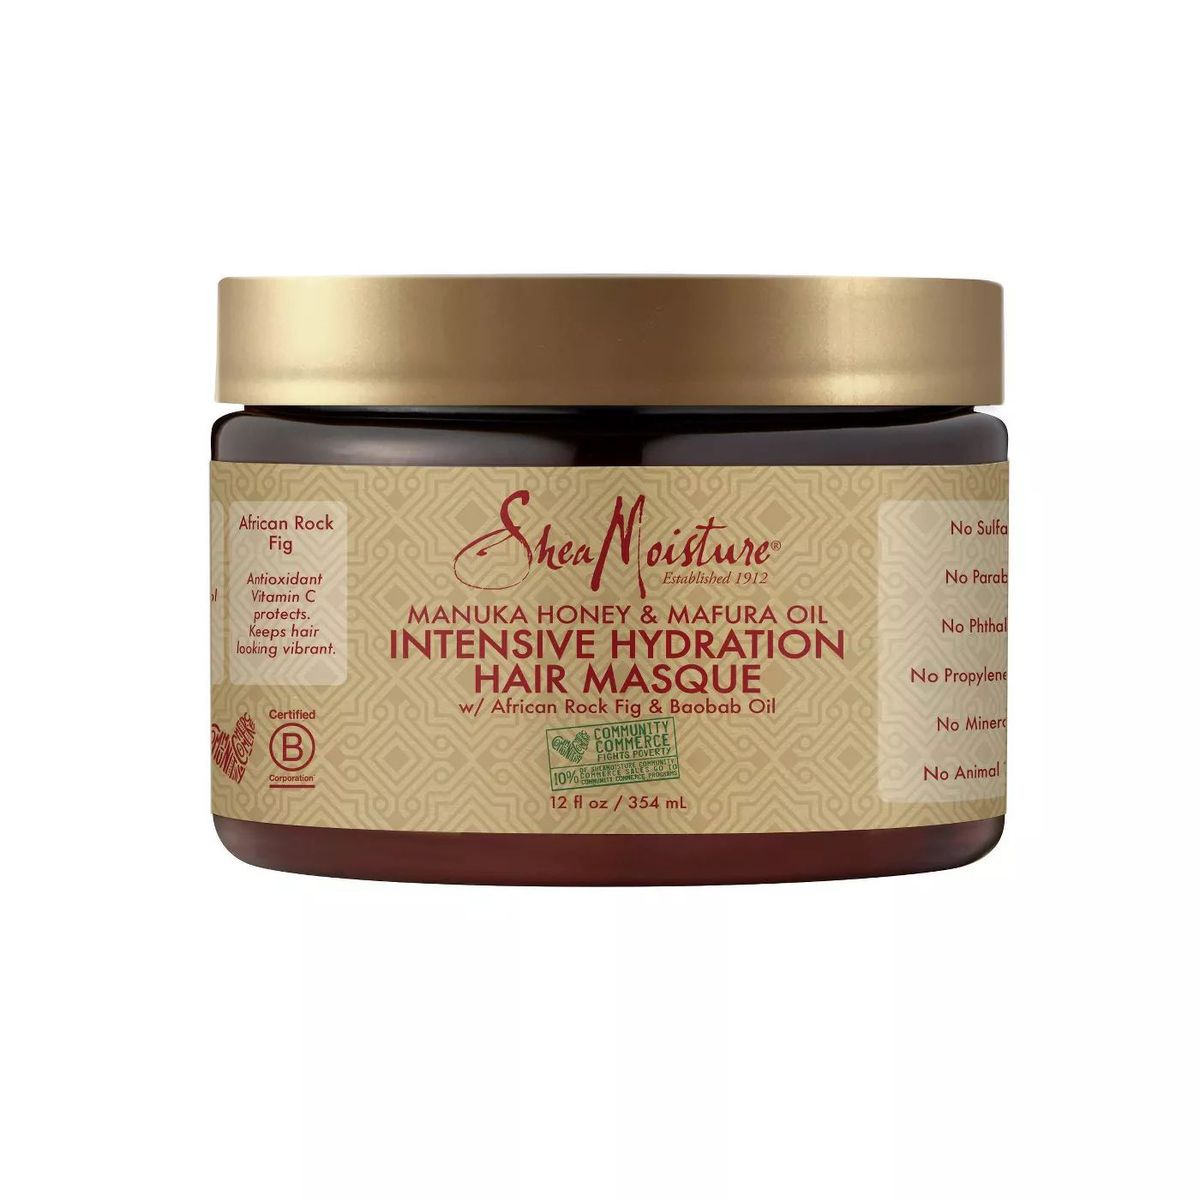 Products To Keep 4C Hair Moisturized This Winter